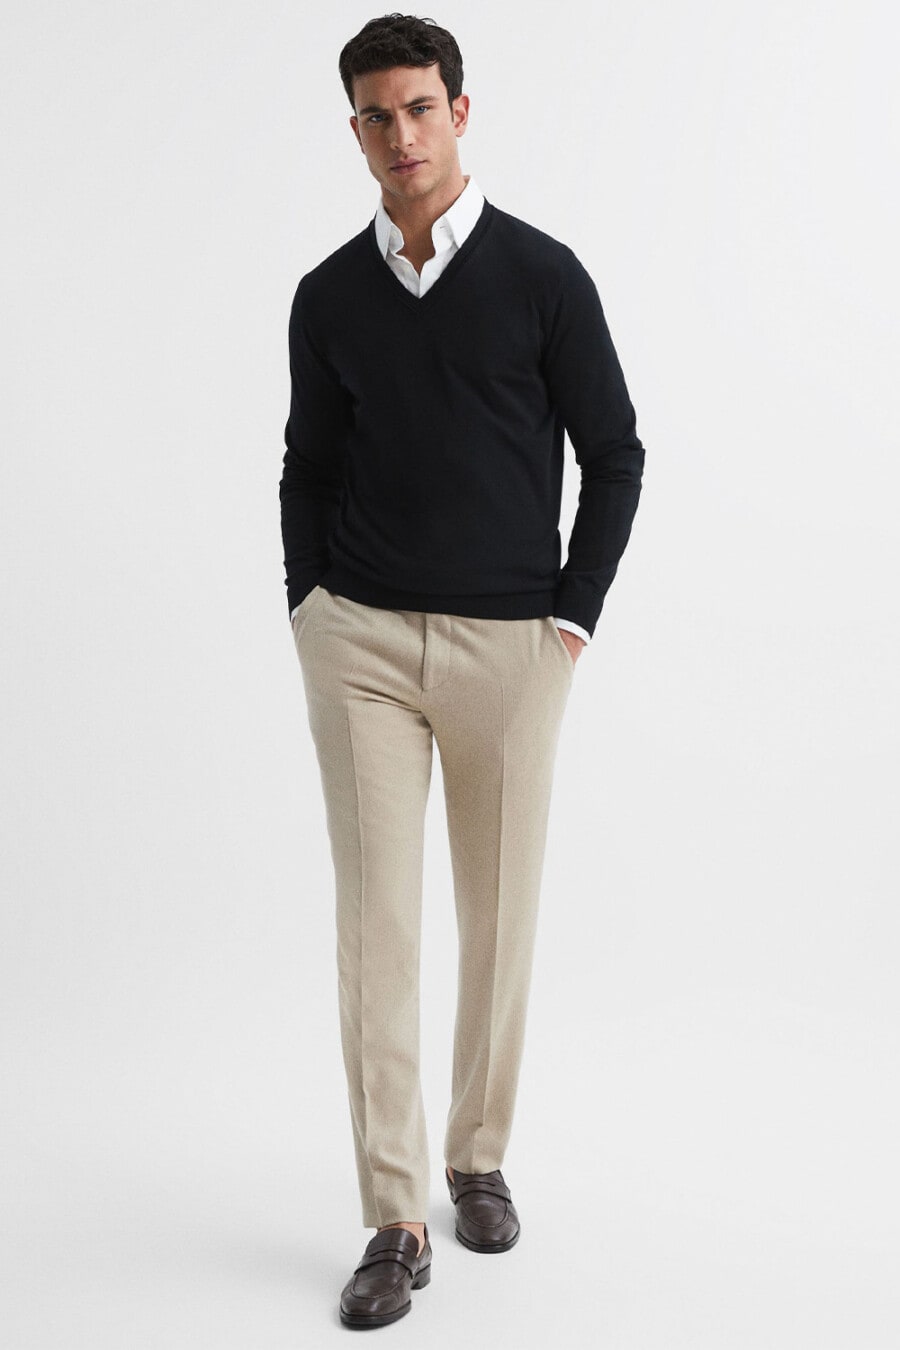 Men's beige tailored pants, white shirt, navy V-neck sweater and brown leather penny loafers outfit